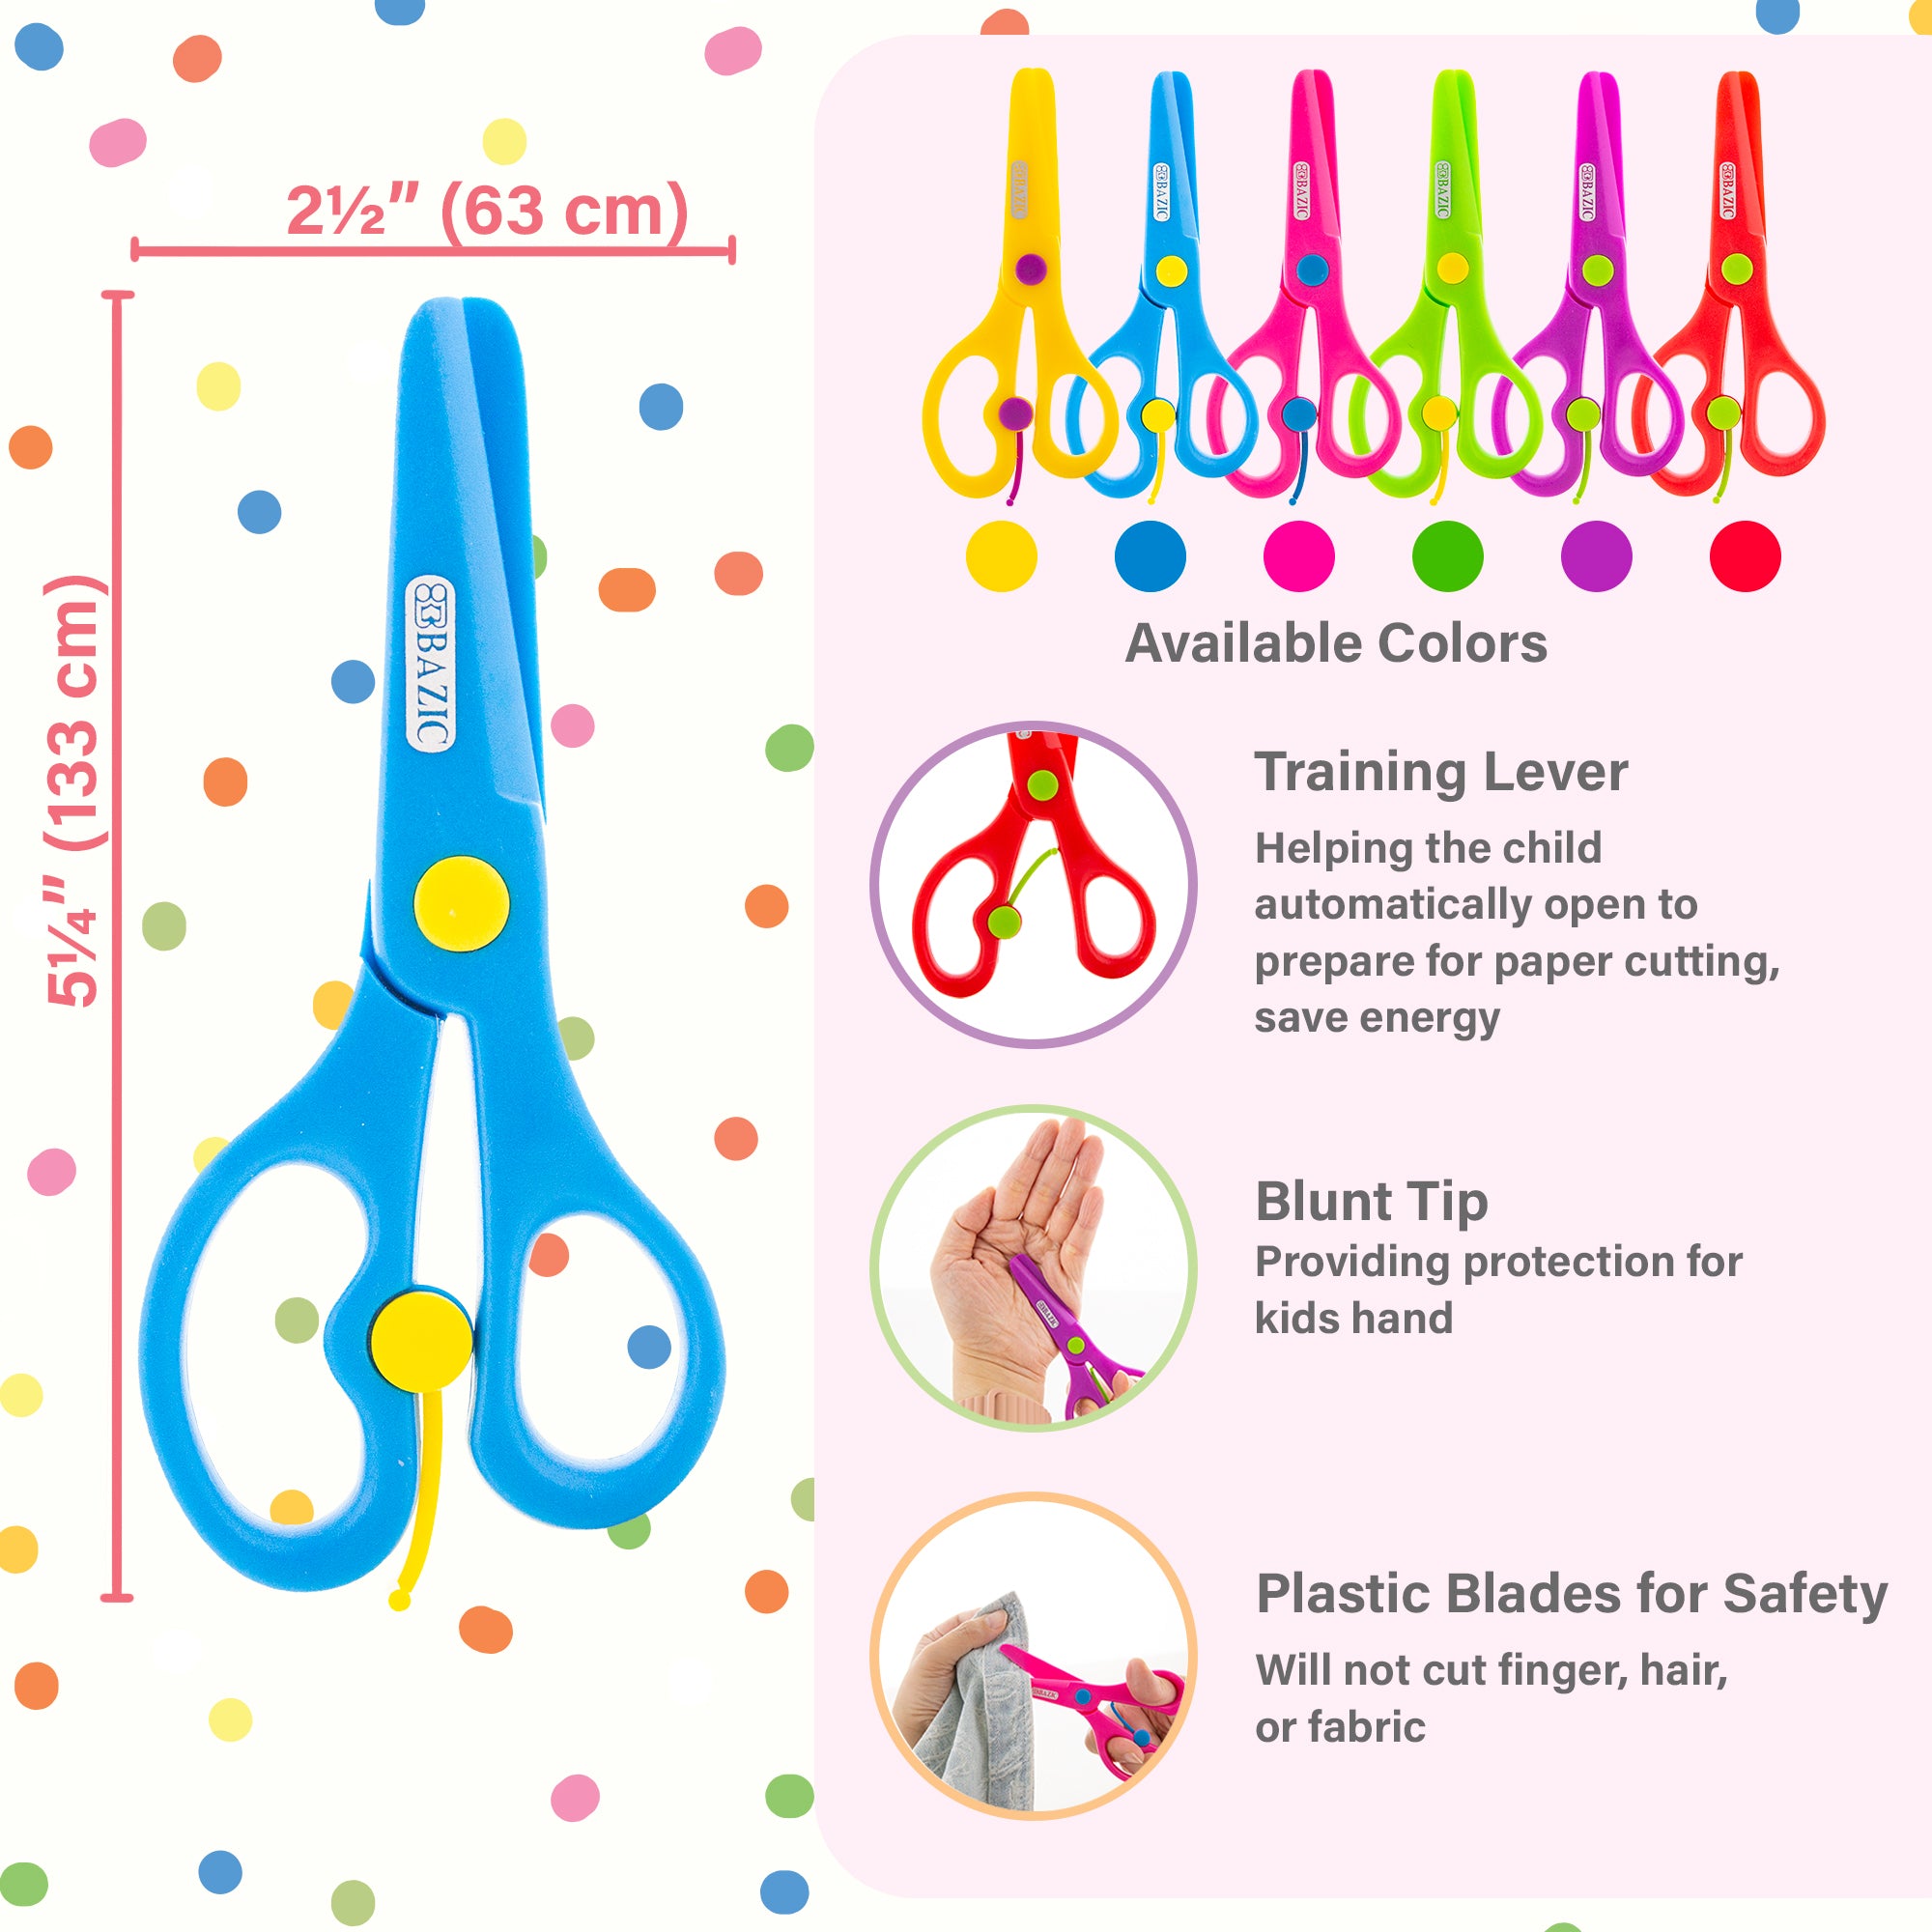 Livingo 24 Pack Bulk Kids Scissors for School, Blunt Tip Safety for Toddle Classroom Crafting, 5 Inches, Blue, Yellow, Red